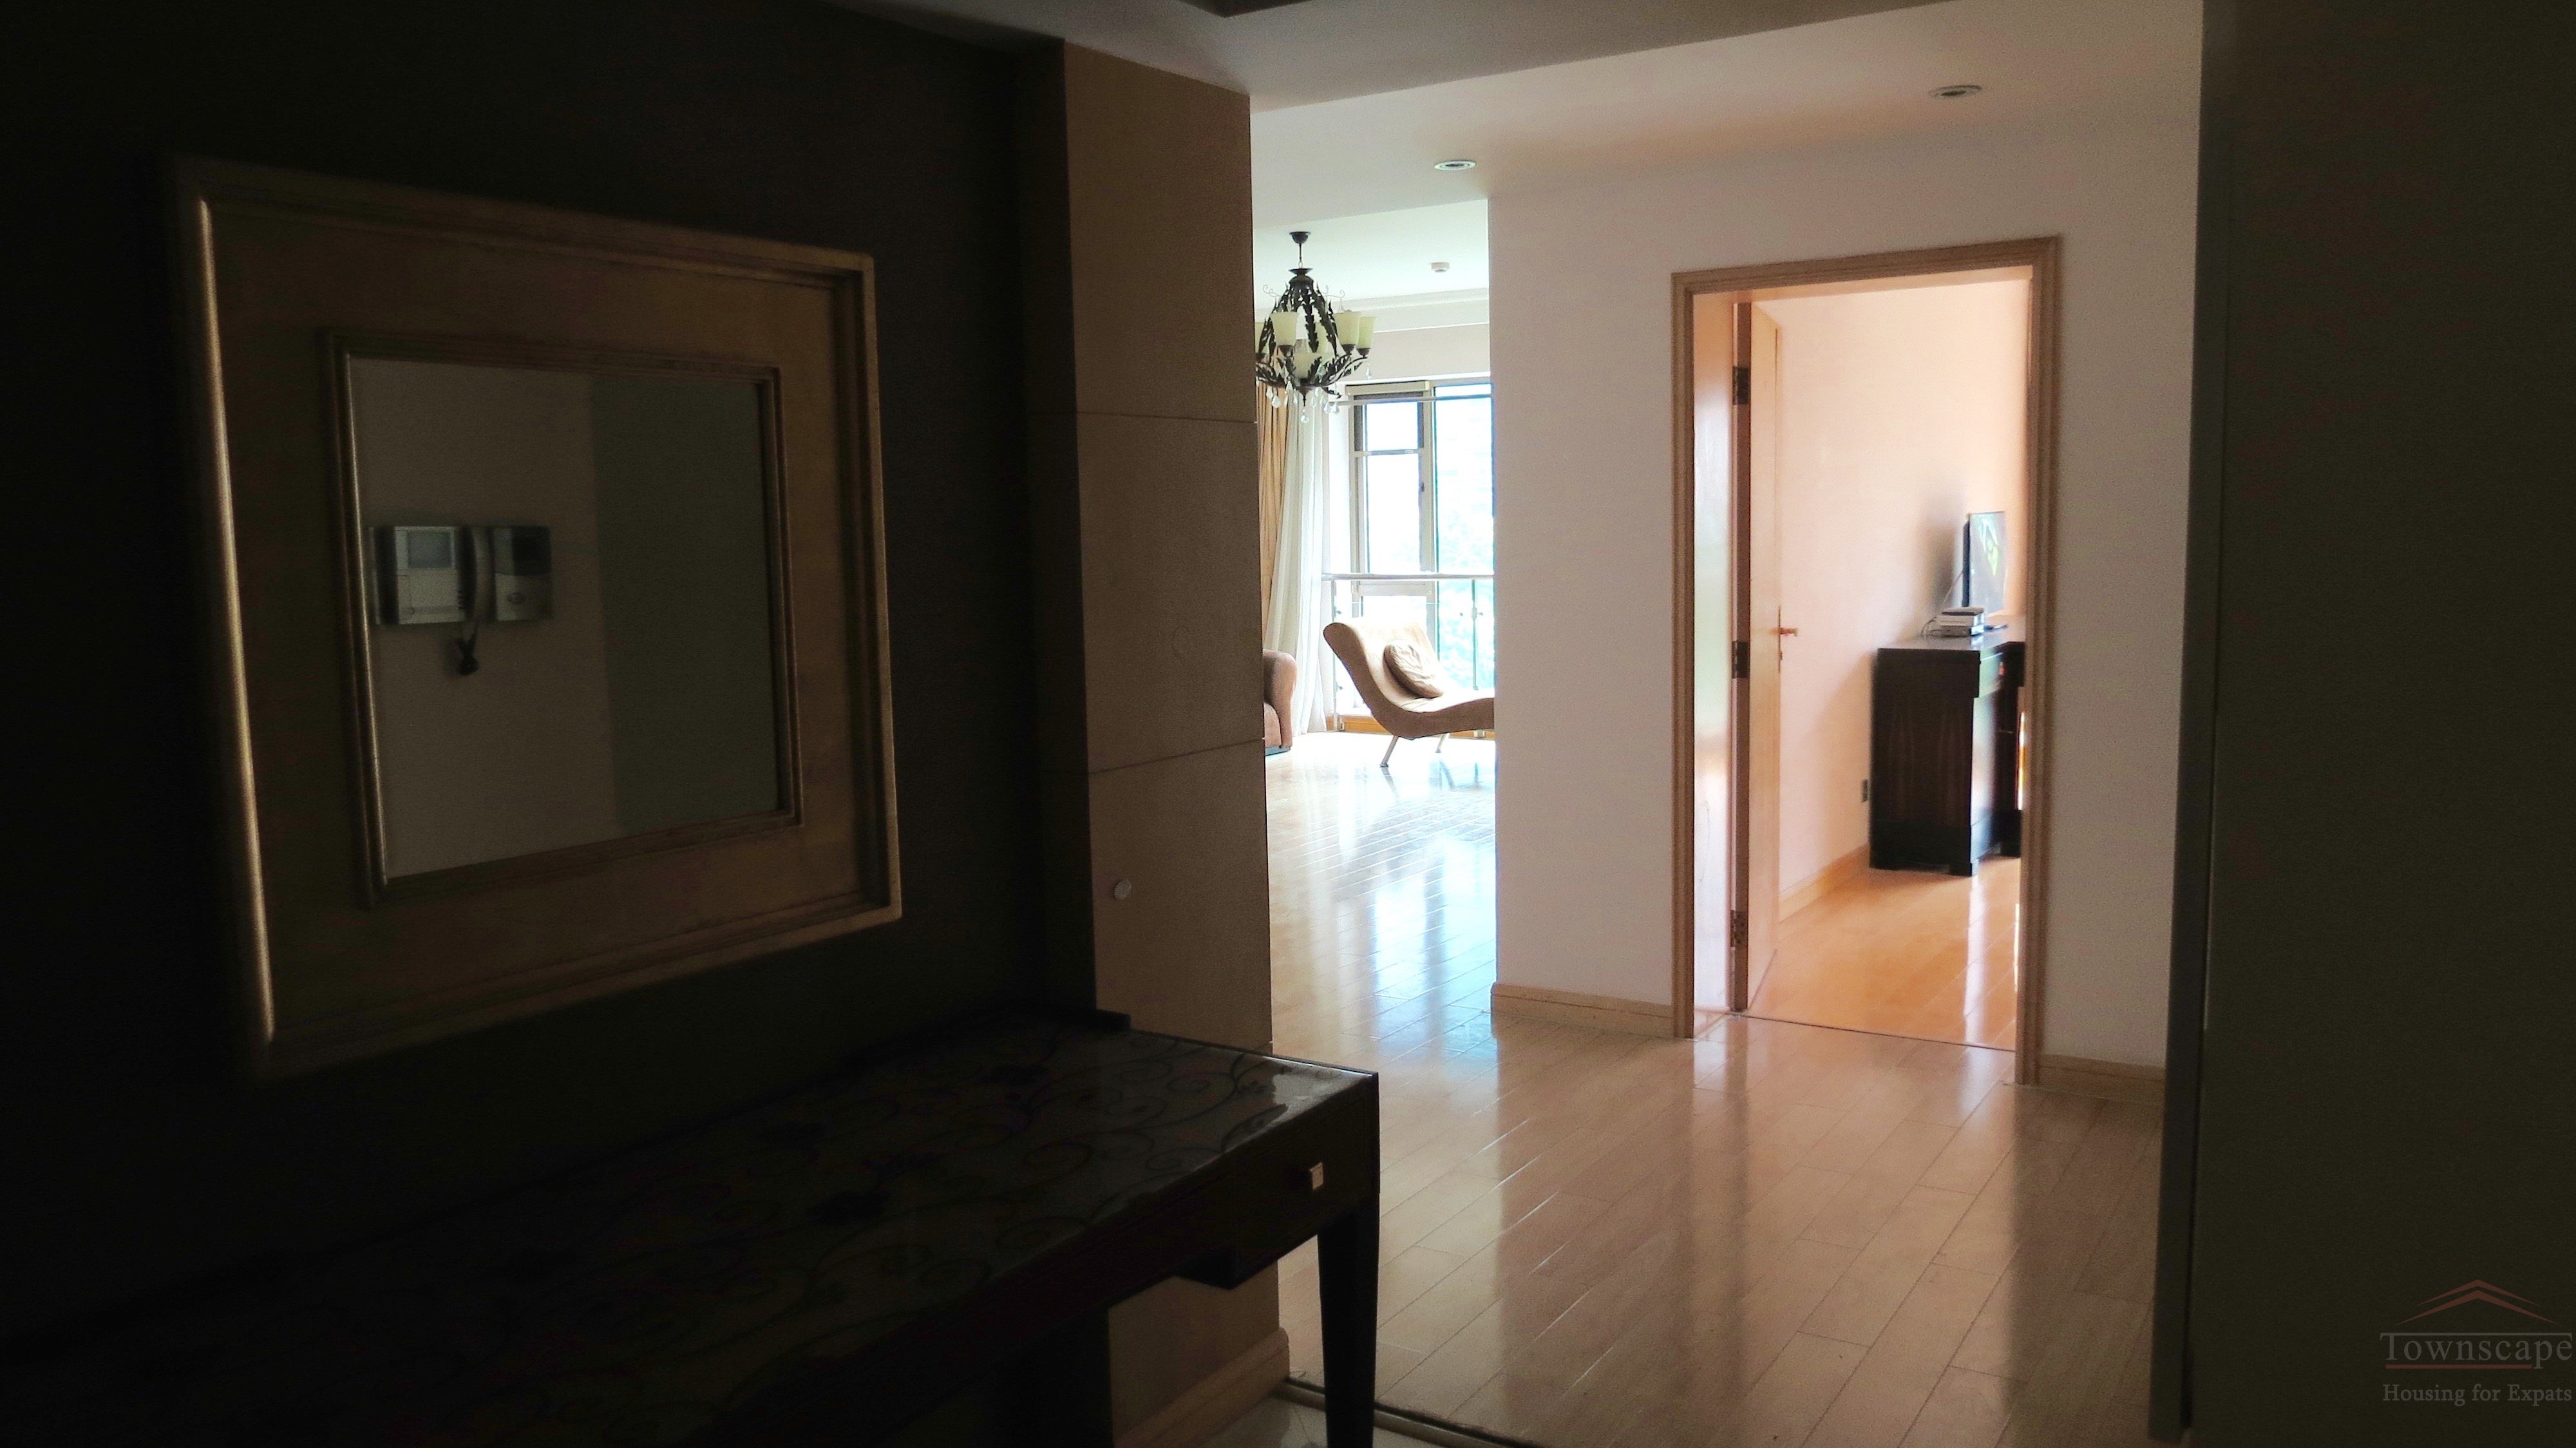  Harmonious 3BR Apartment in Pudong Area